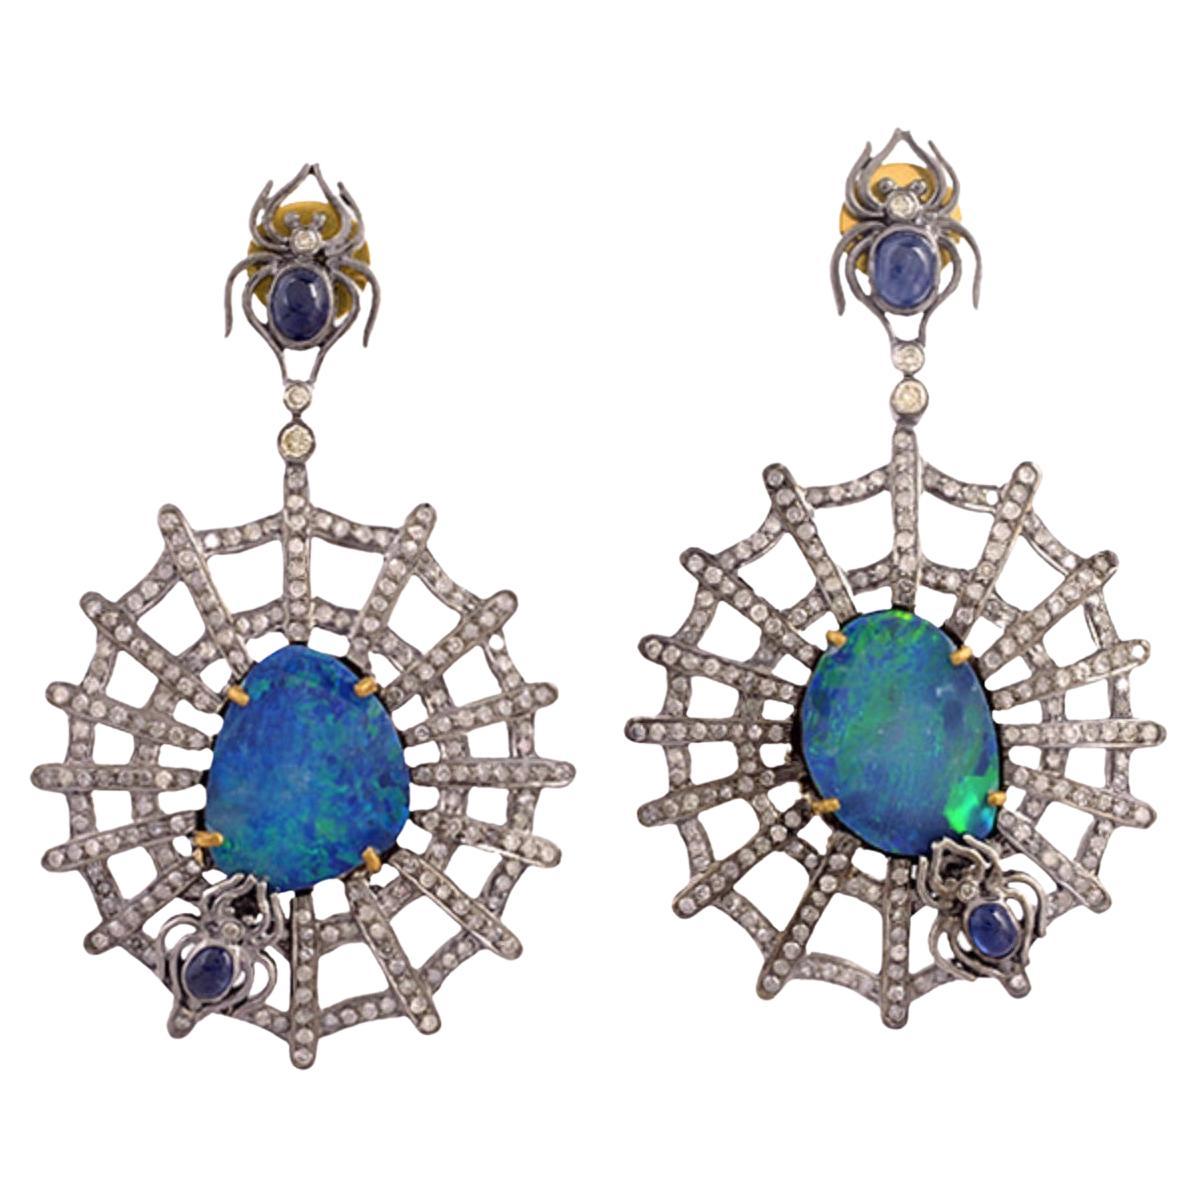 Sliced Opal & Blue Sapphire Earrings with Spider & Web Design in Pave Diamonds